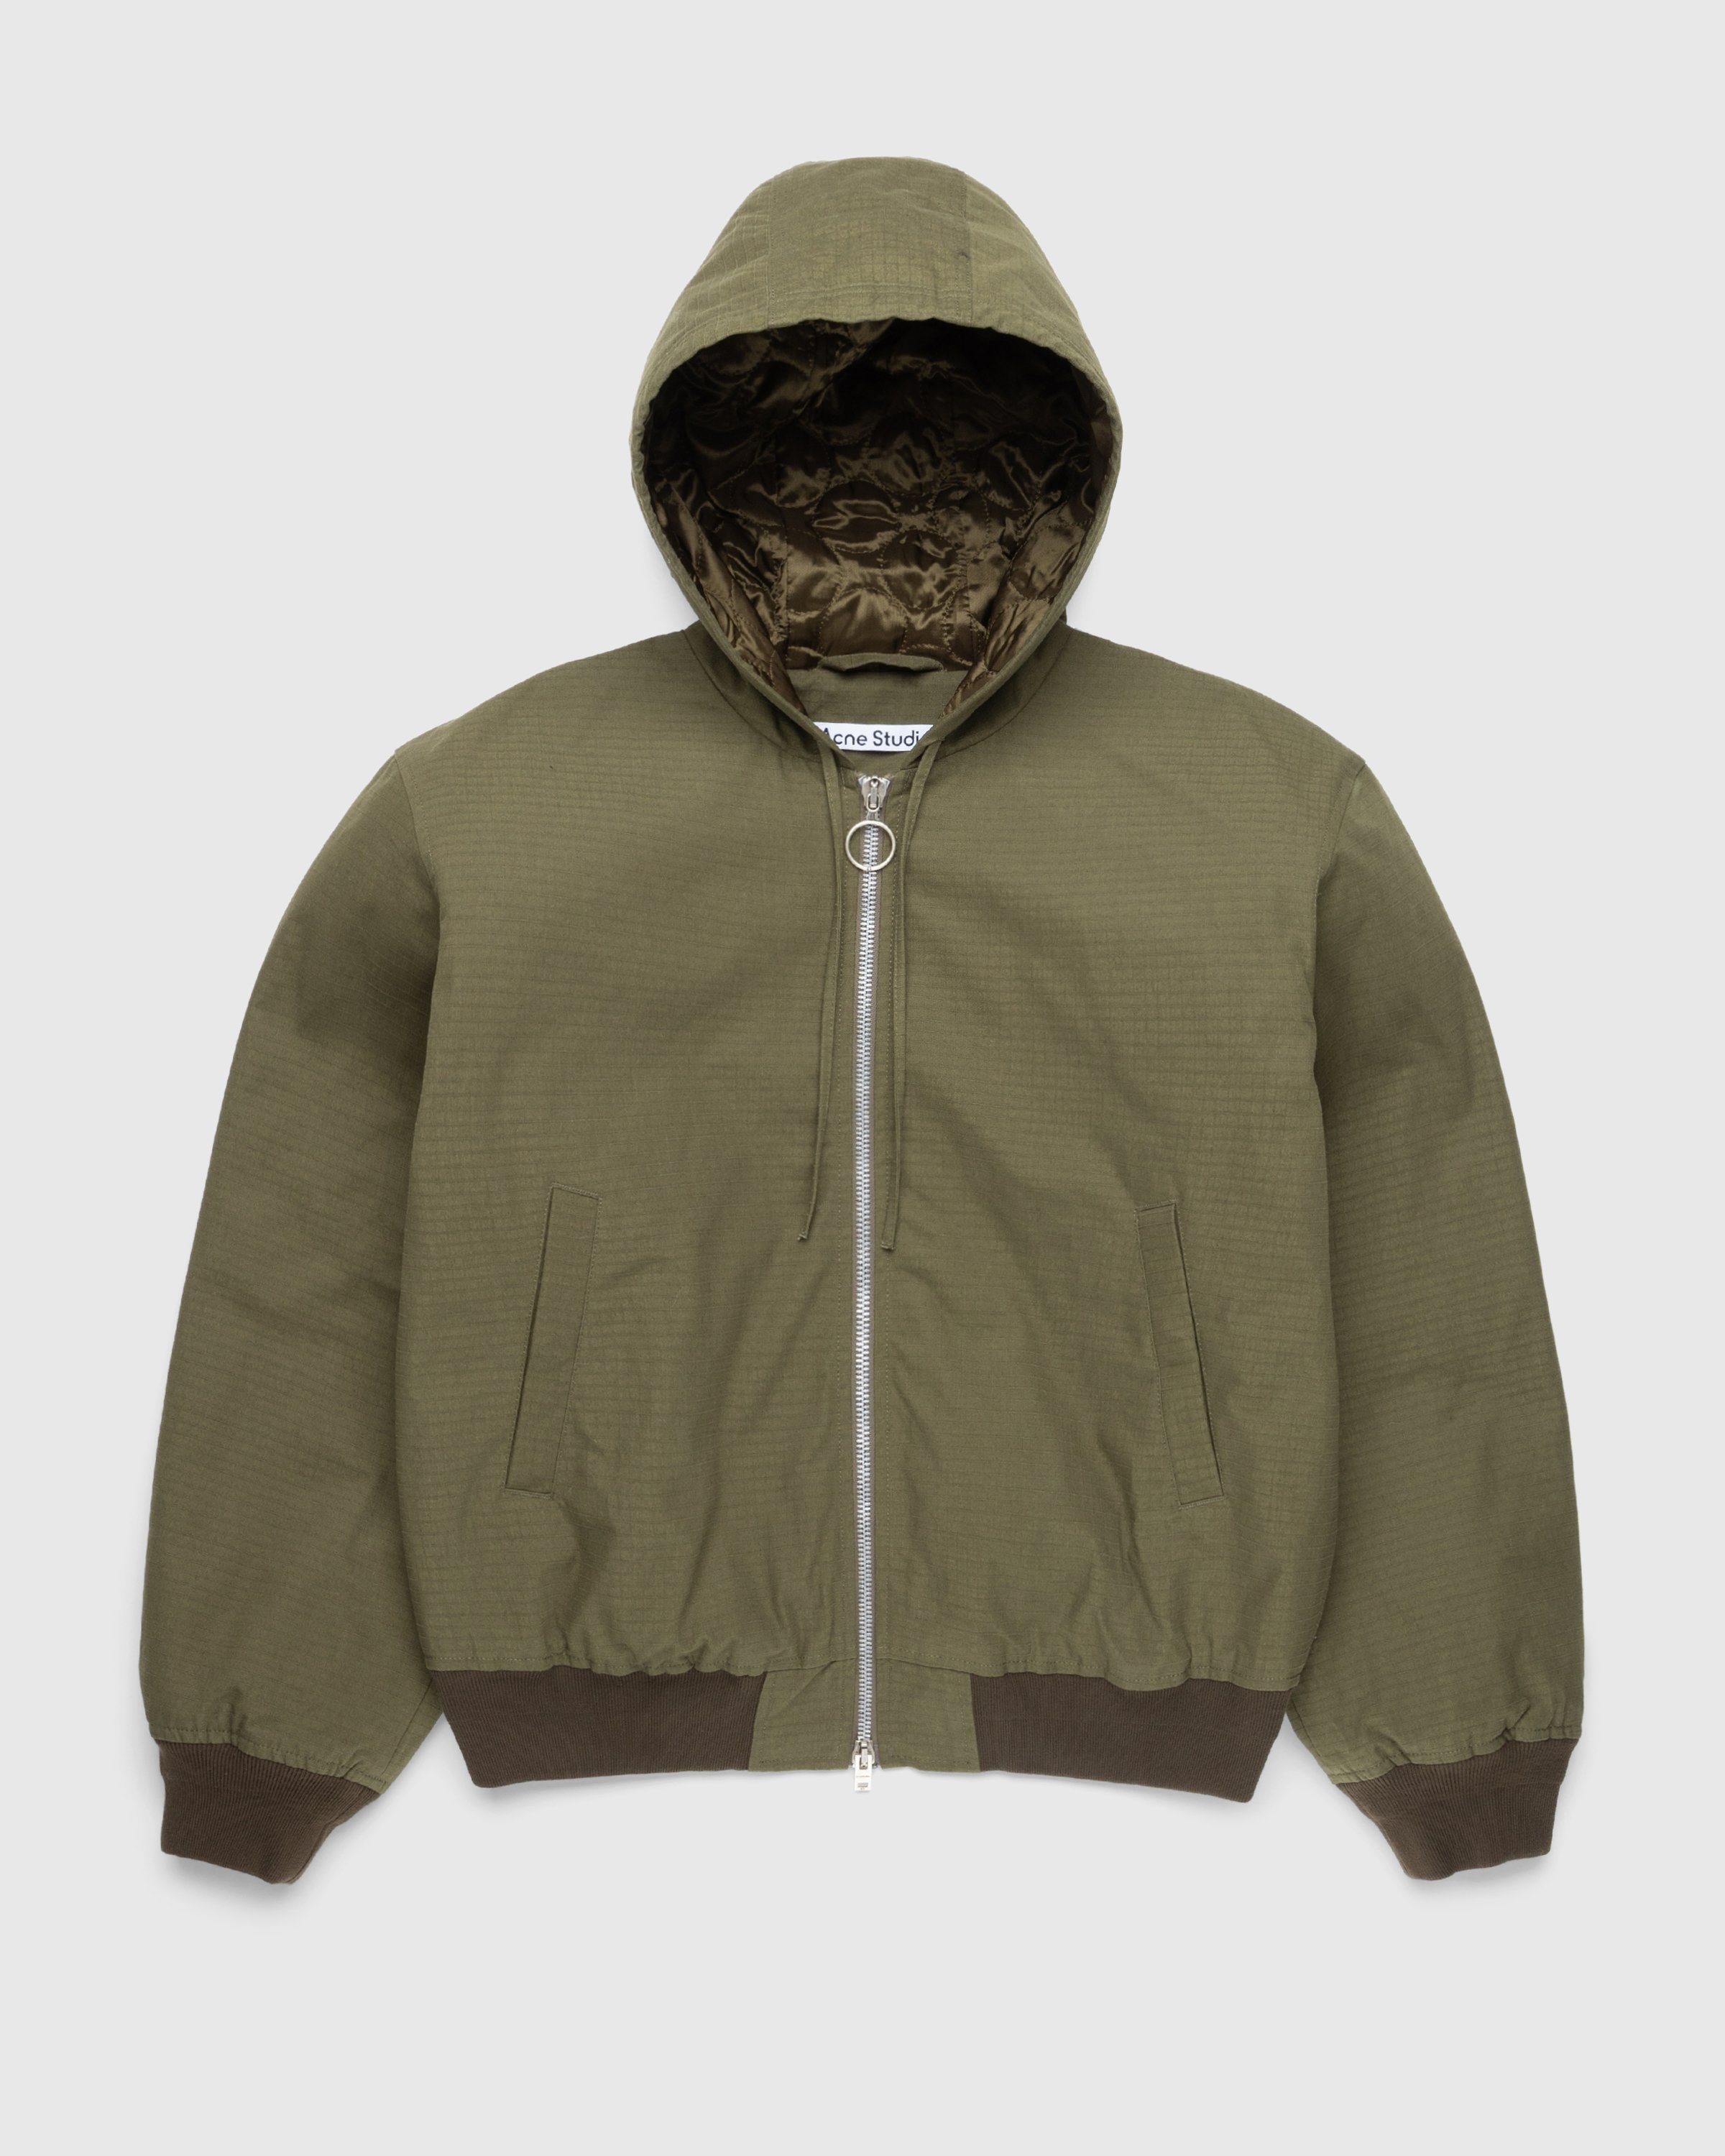 Acne Studios - Ripstop Padded Jacket Olive Green - Clothing - Green - Image 1